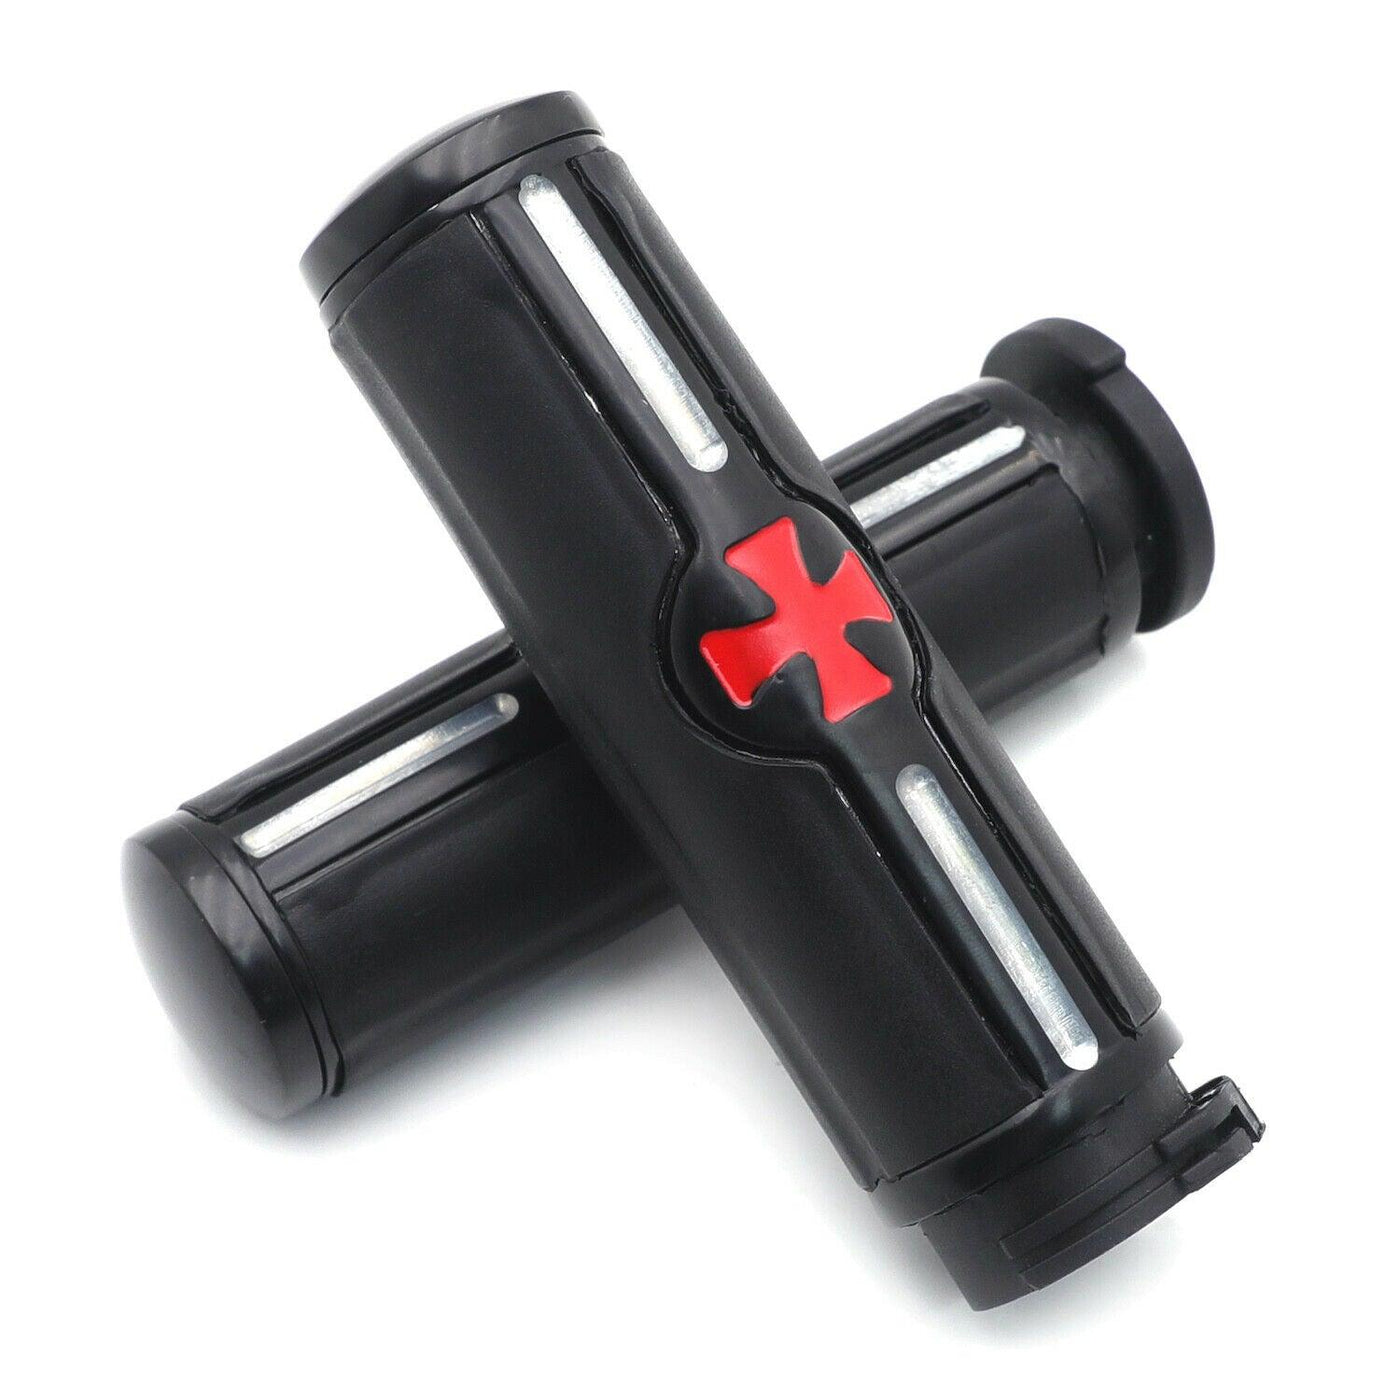 Black Cross 1" 25mm Hand grips For Harley Davidson Customs Dyna Softail Touring - Moto Life Products